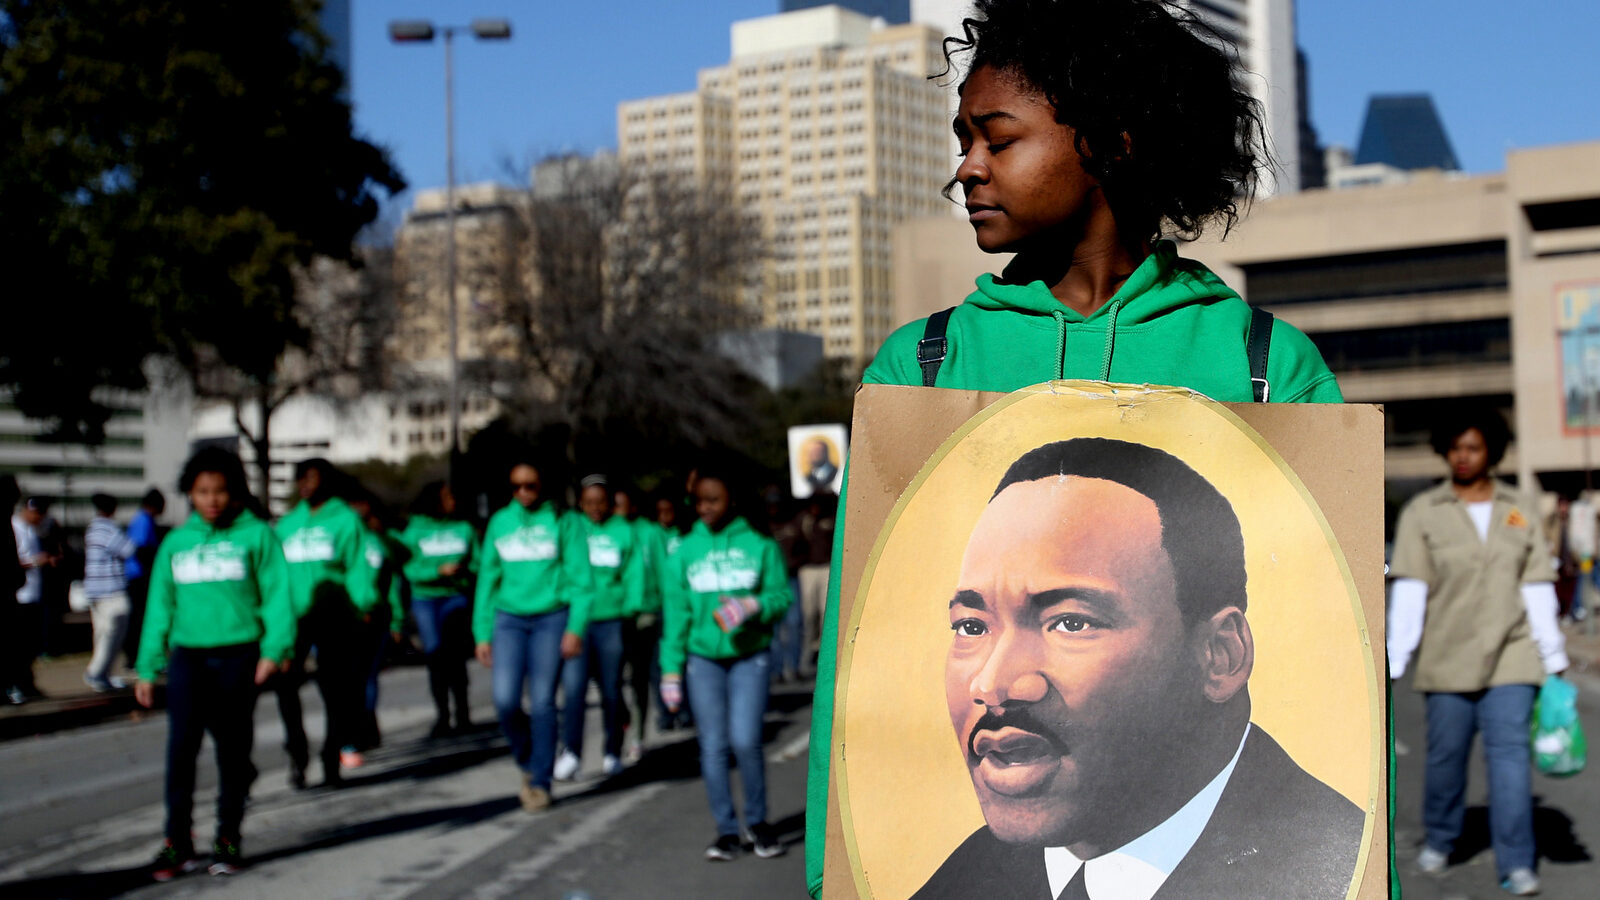 Sakidra Davis of Alpha Rho Xinos carries an image of Martin Luther King Jr. during the 32nd annual Martin Luther King Jr. Birthday Celebration's March/Parade on Saturday Jan. 18, 2014, in Dallas, Texas. (AP Photo/The Dallas Morning News, Sarah Hoffman)